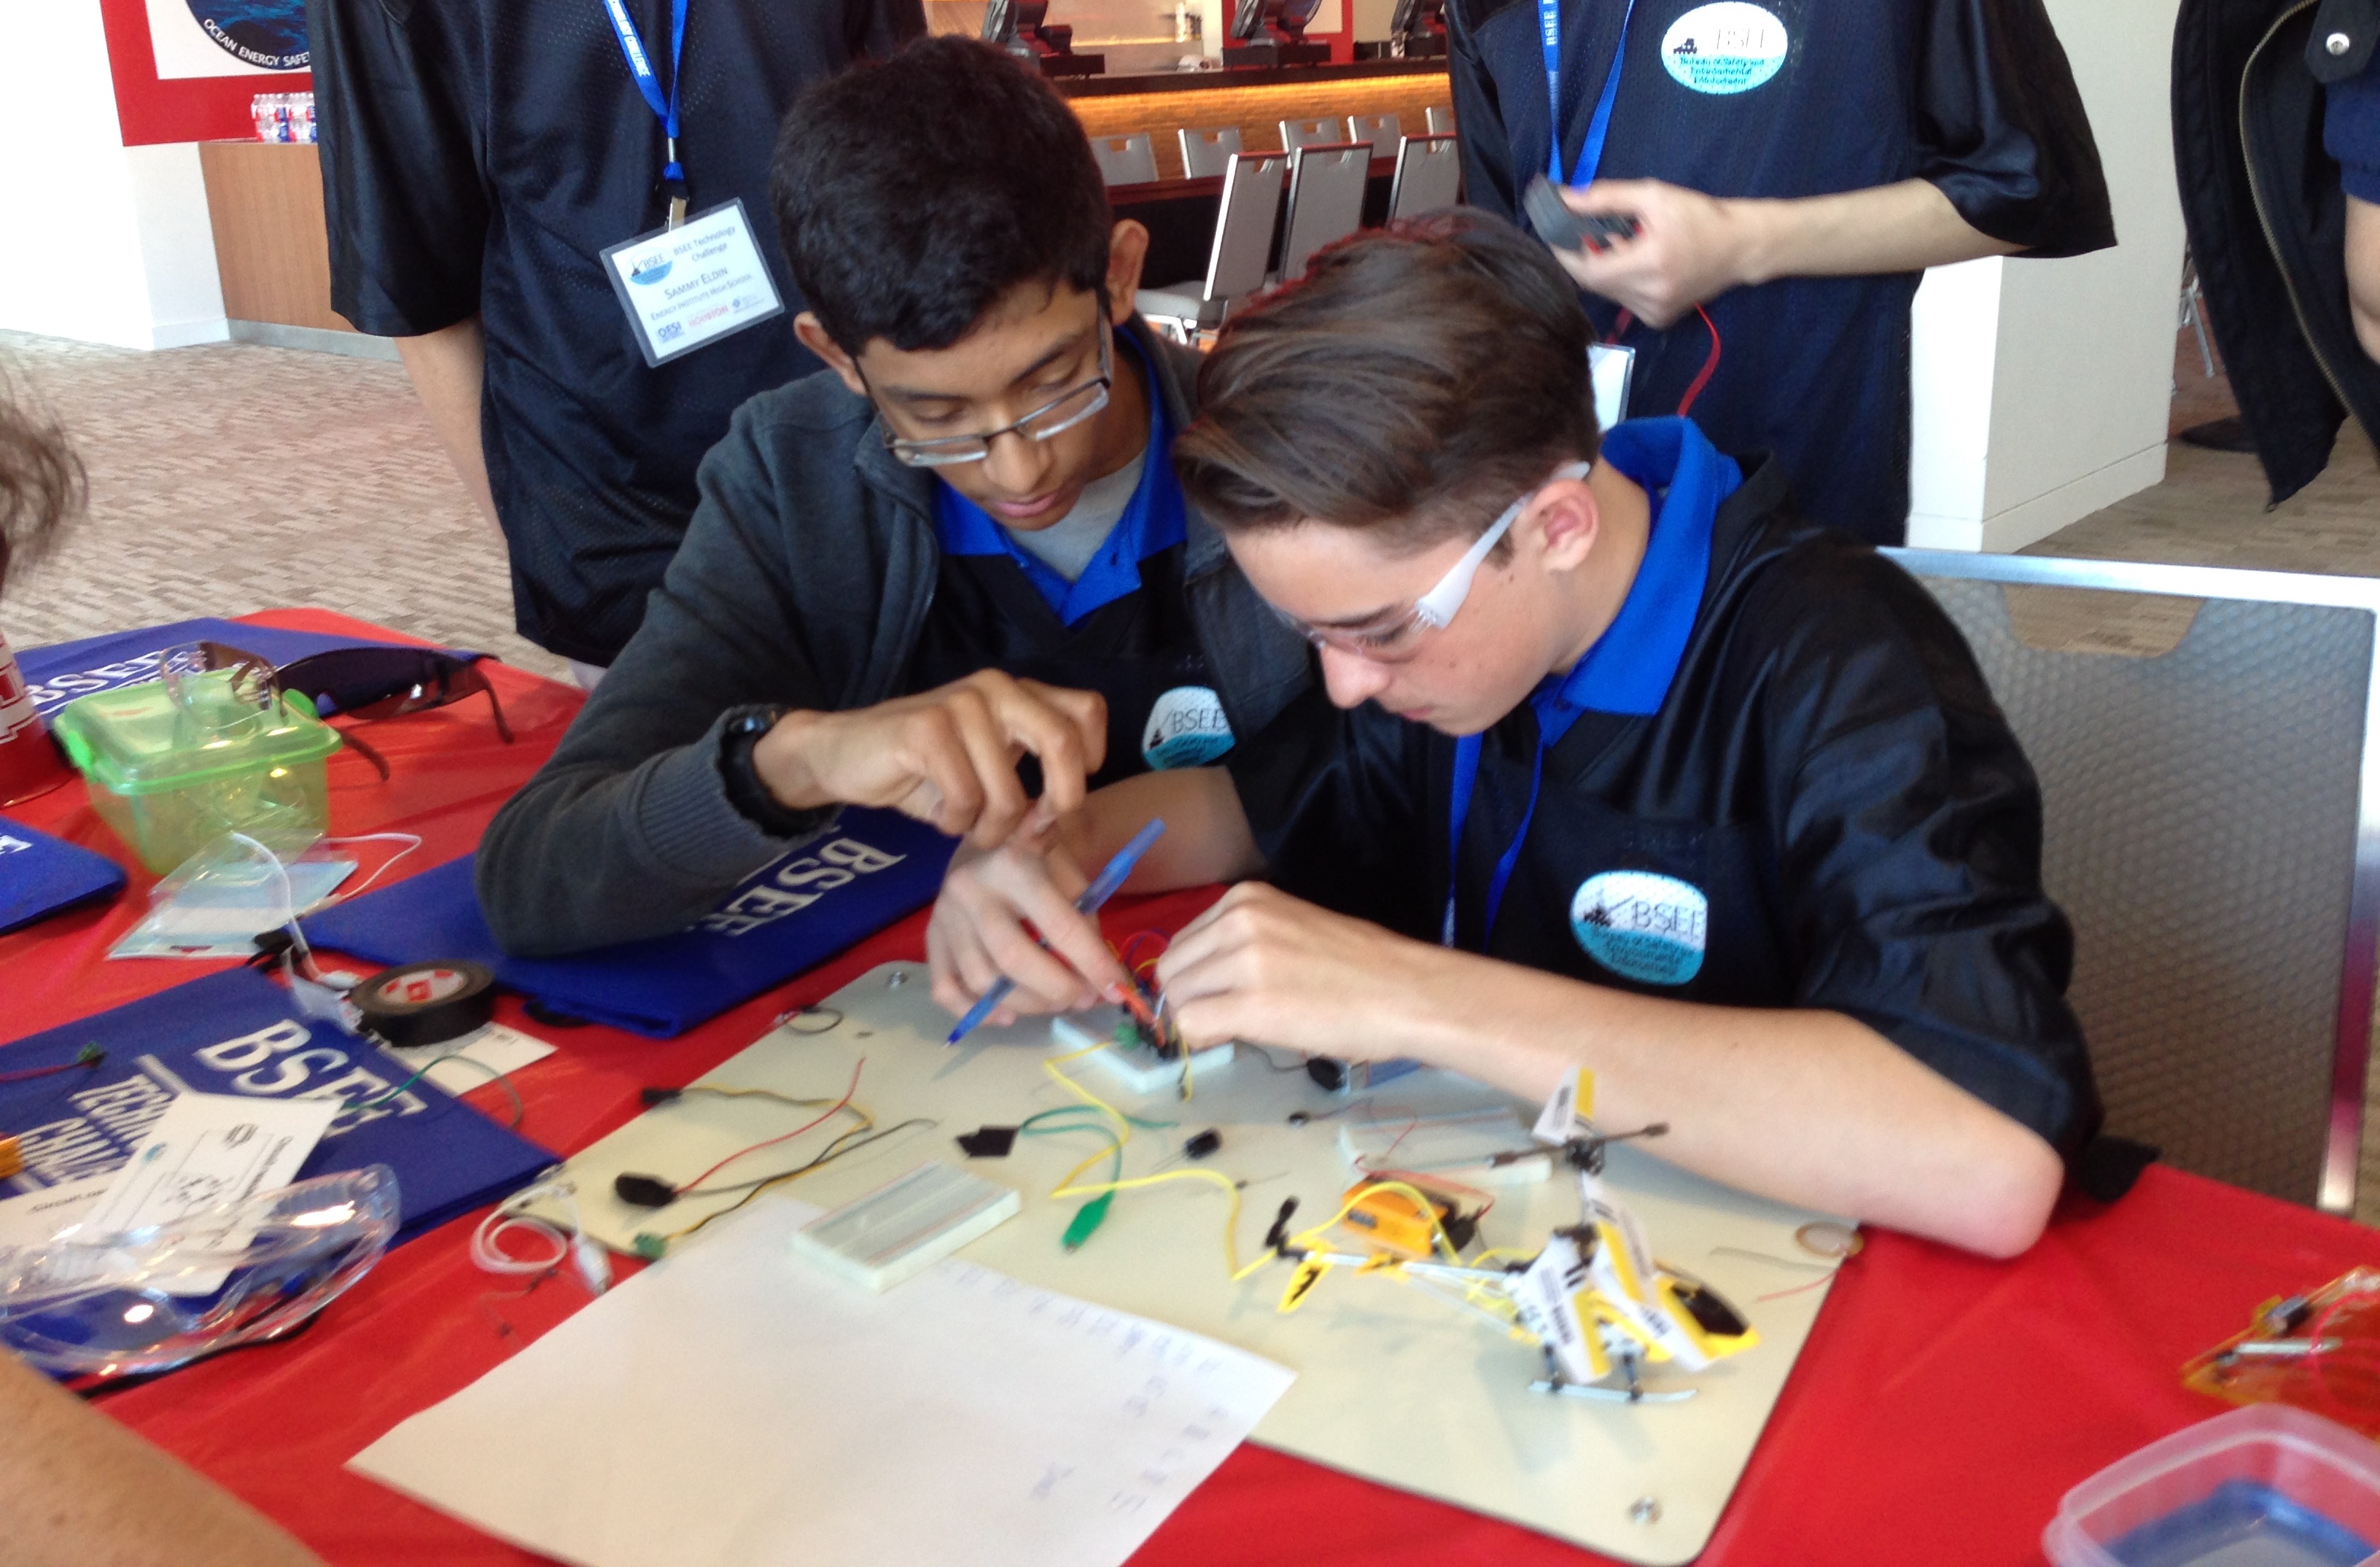 Jose Saravia and Matthew McEwan review the connections of one of the devices they used in the competition.